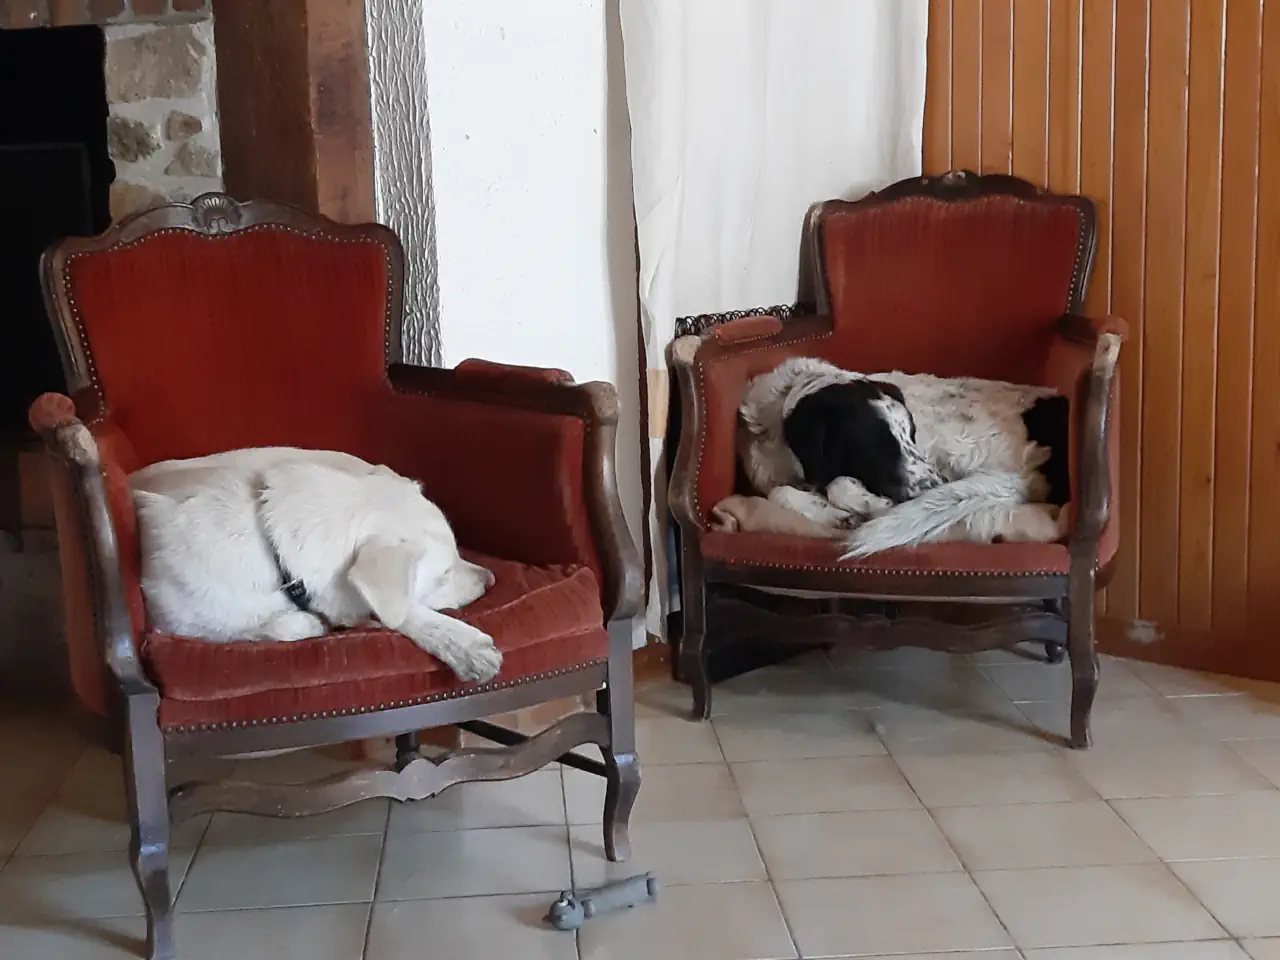 Comet and shadow on their favourite chairs